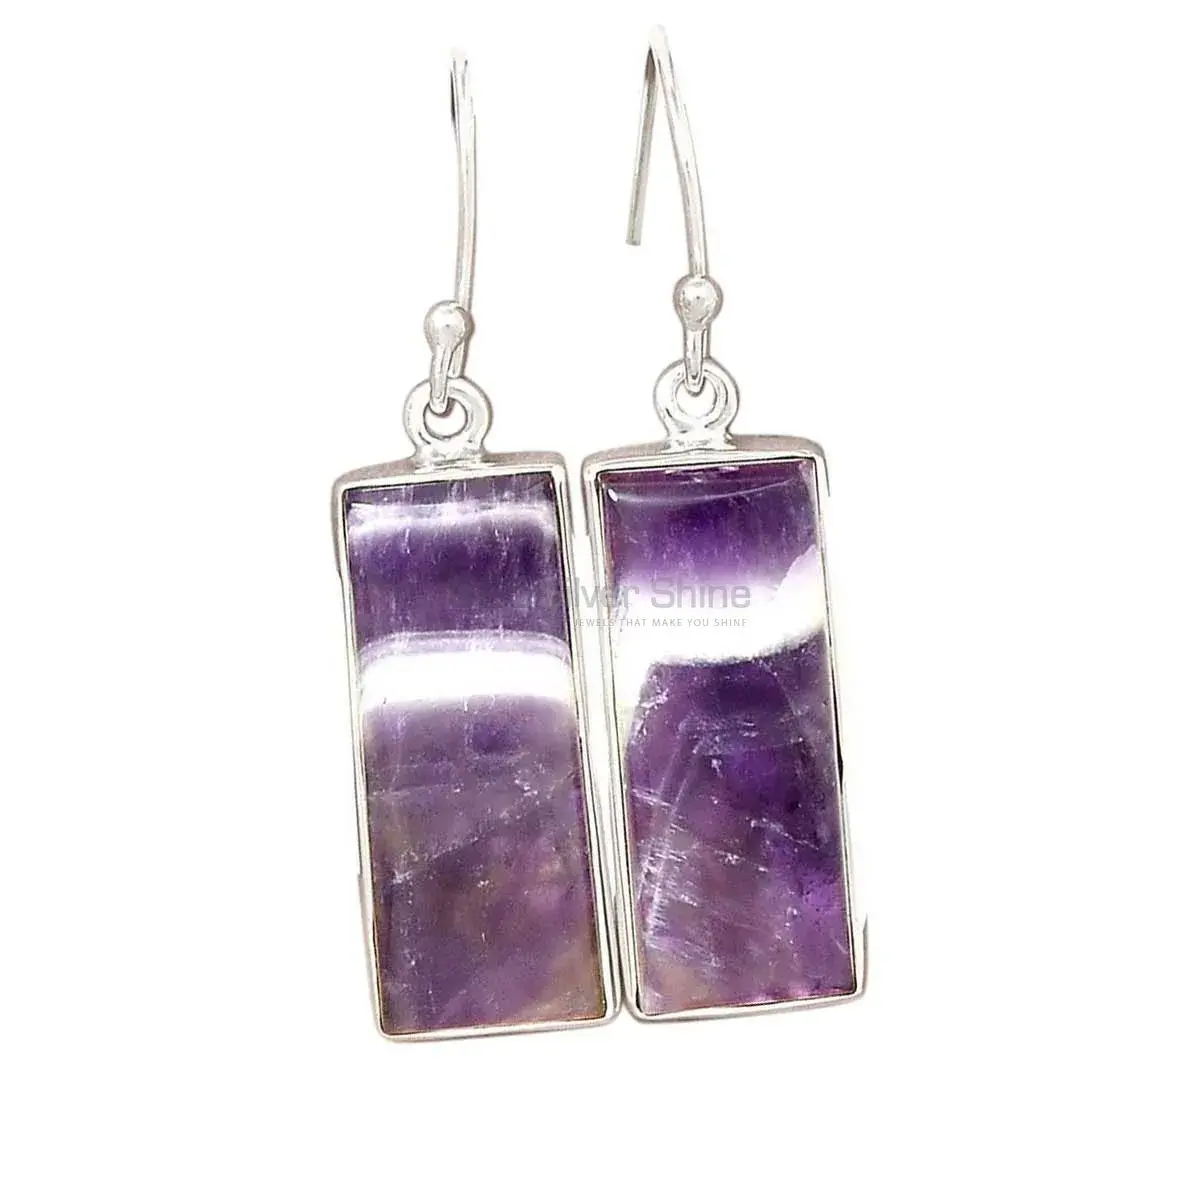 Inexpensive 925 Sterling Silver Earrings Wholesaler In Amethyst Lace agate Gemstone Jewelry 925SE2705_8